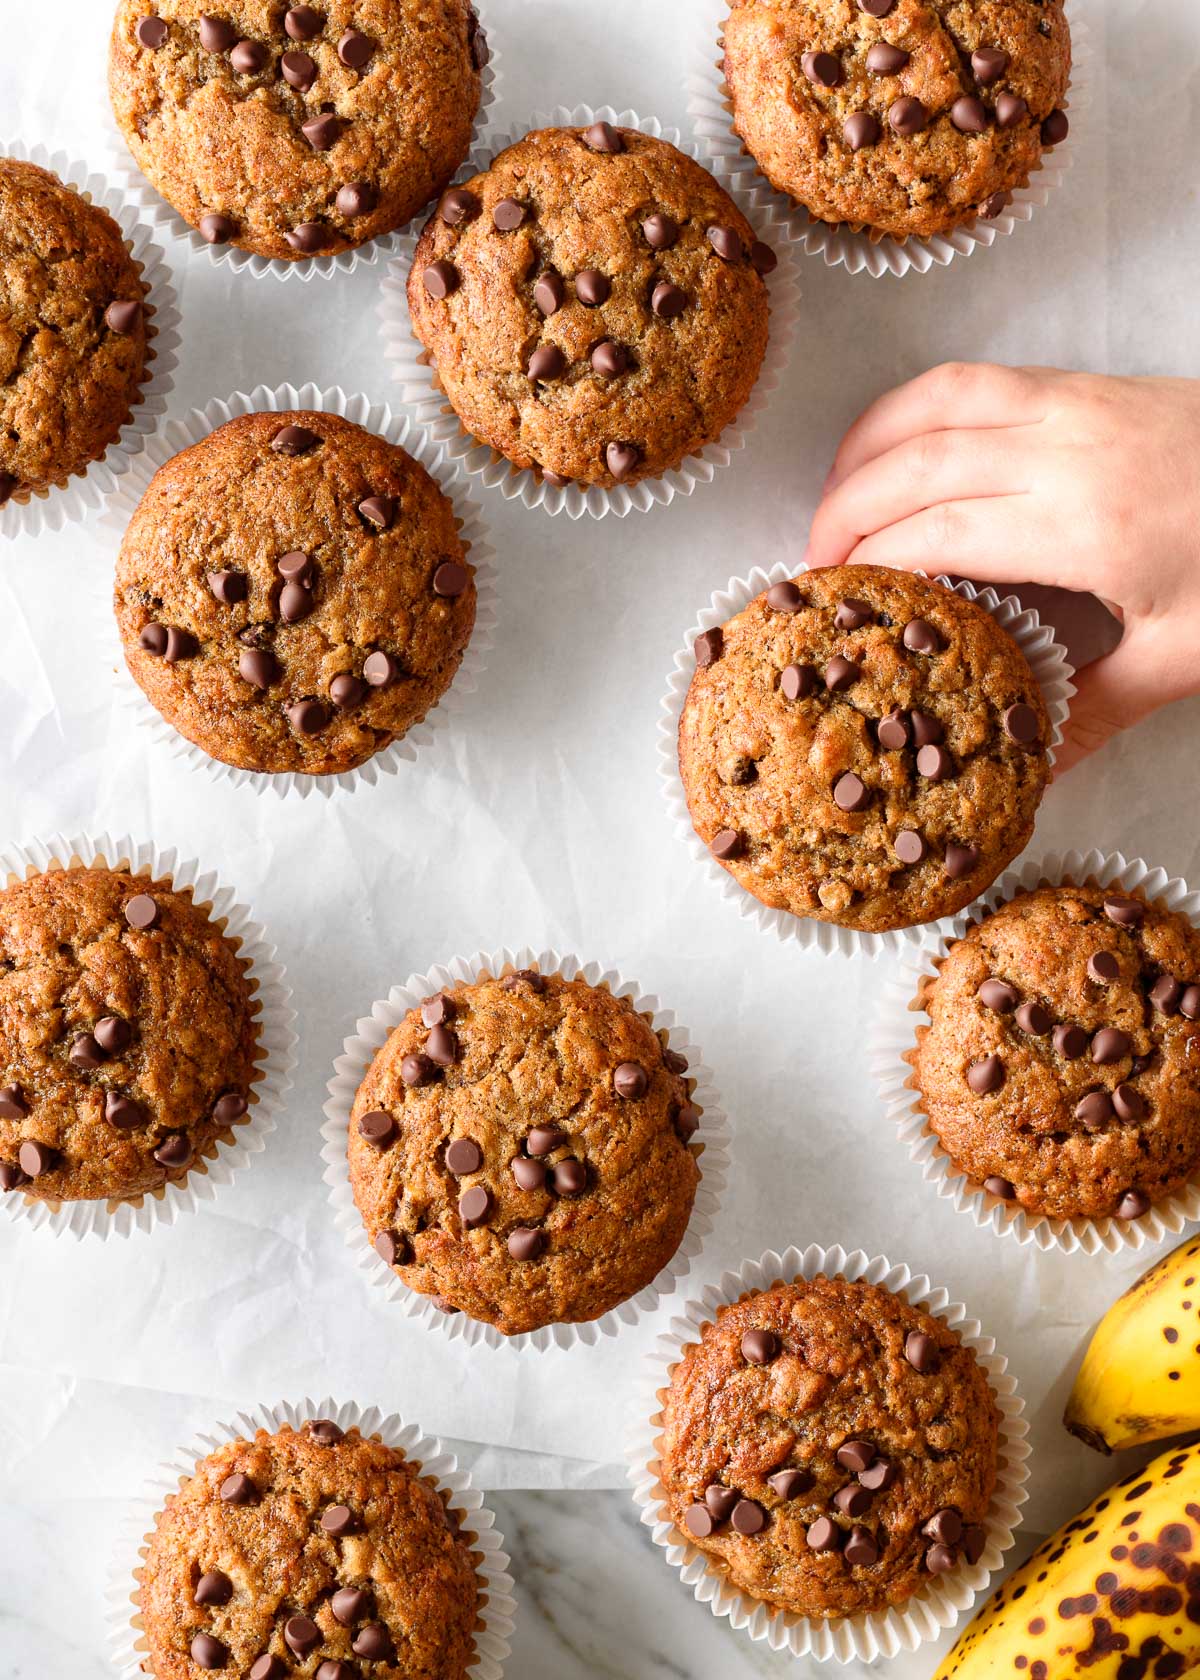 A toddler's hand reaching for a chocolate chip banana muffin on a white parchment paper background.